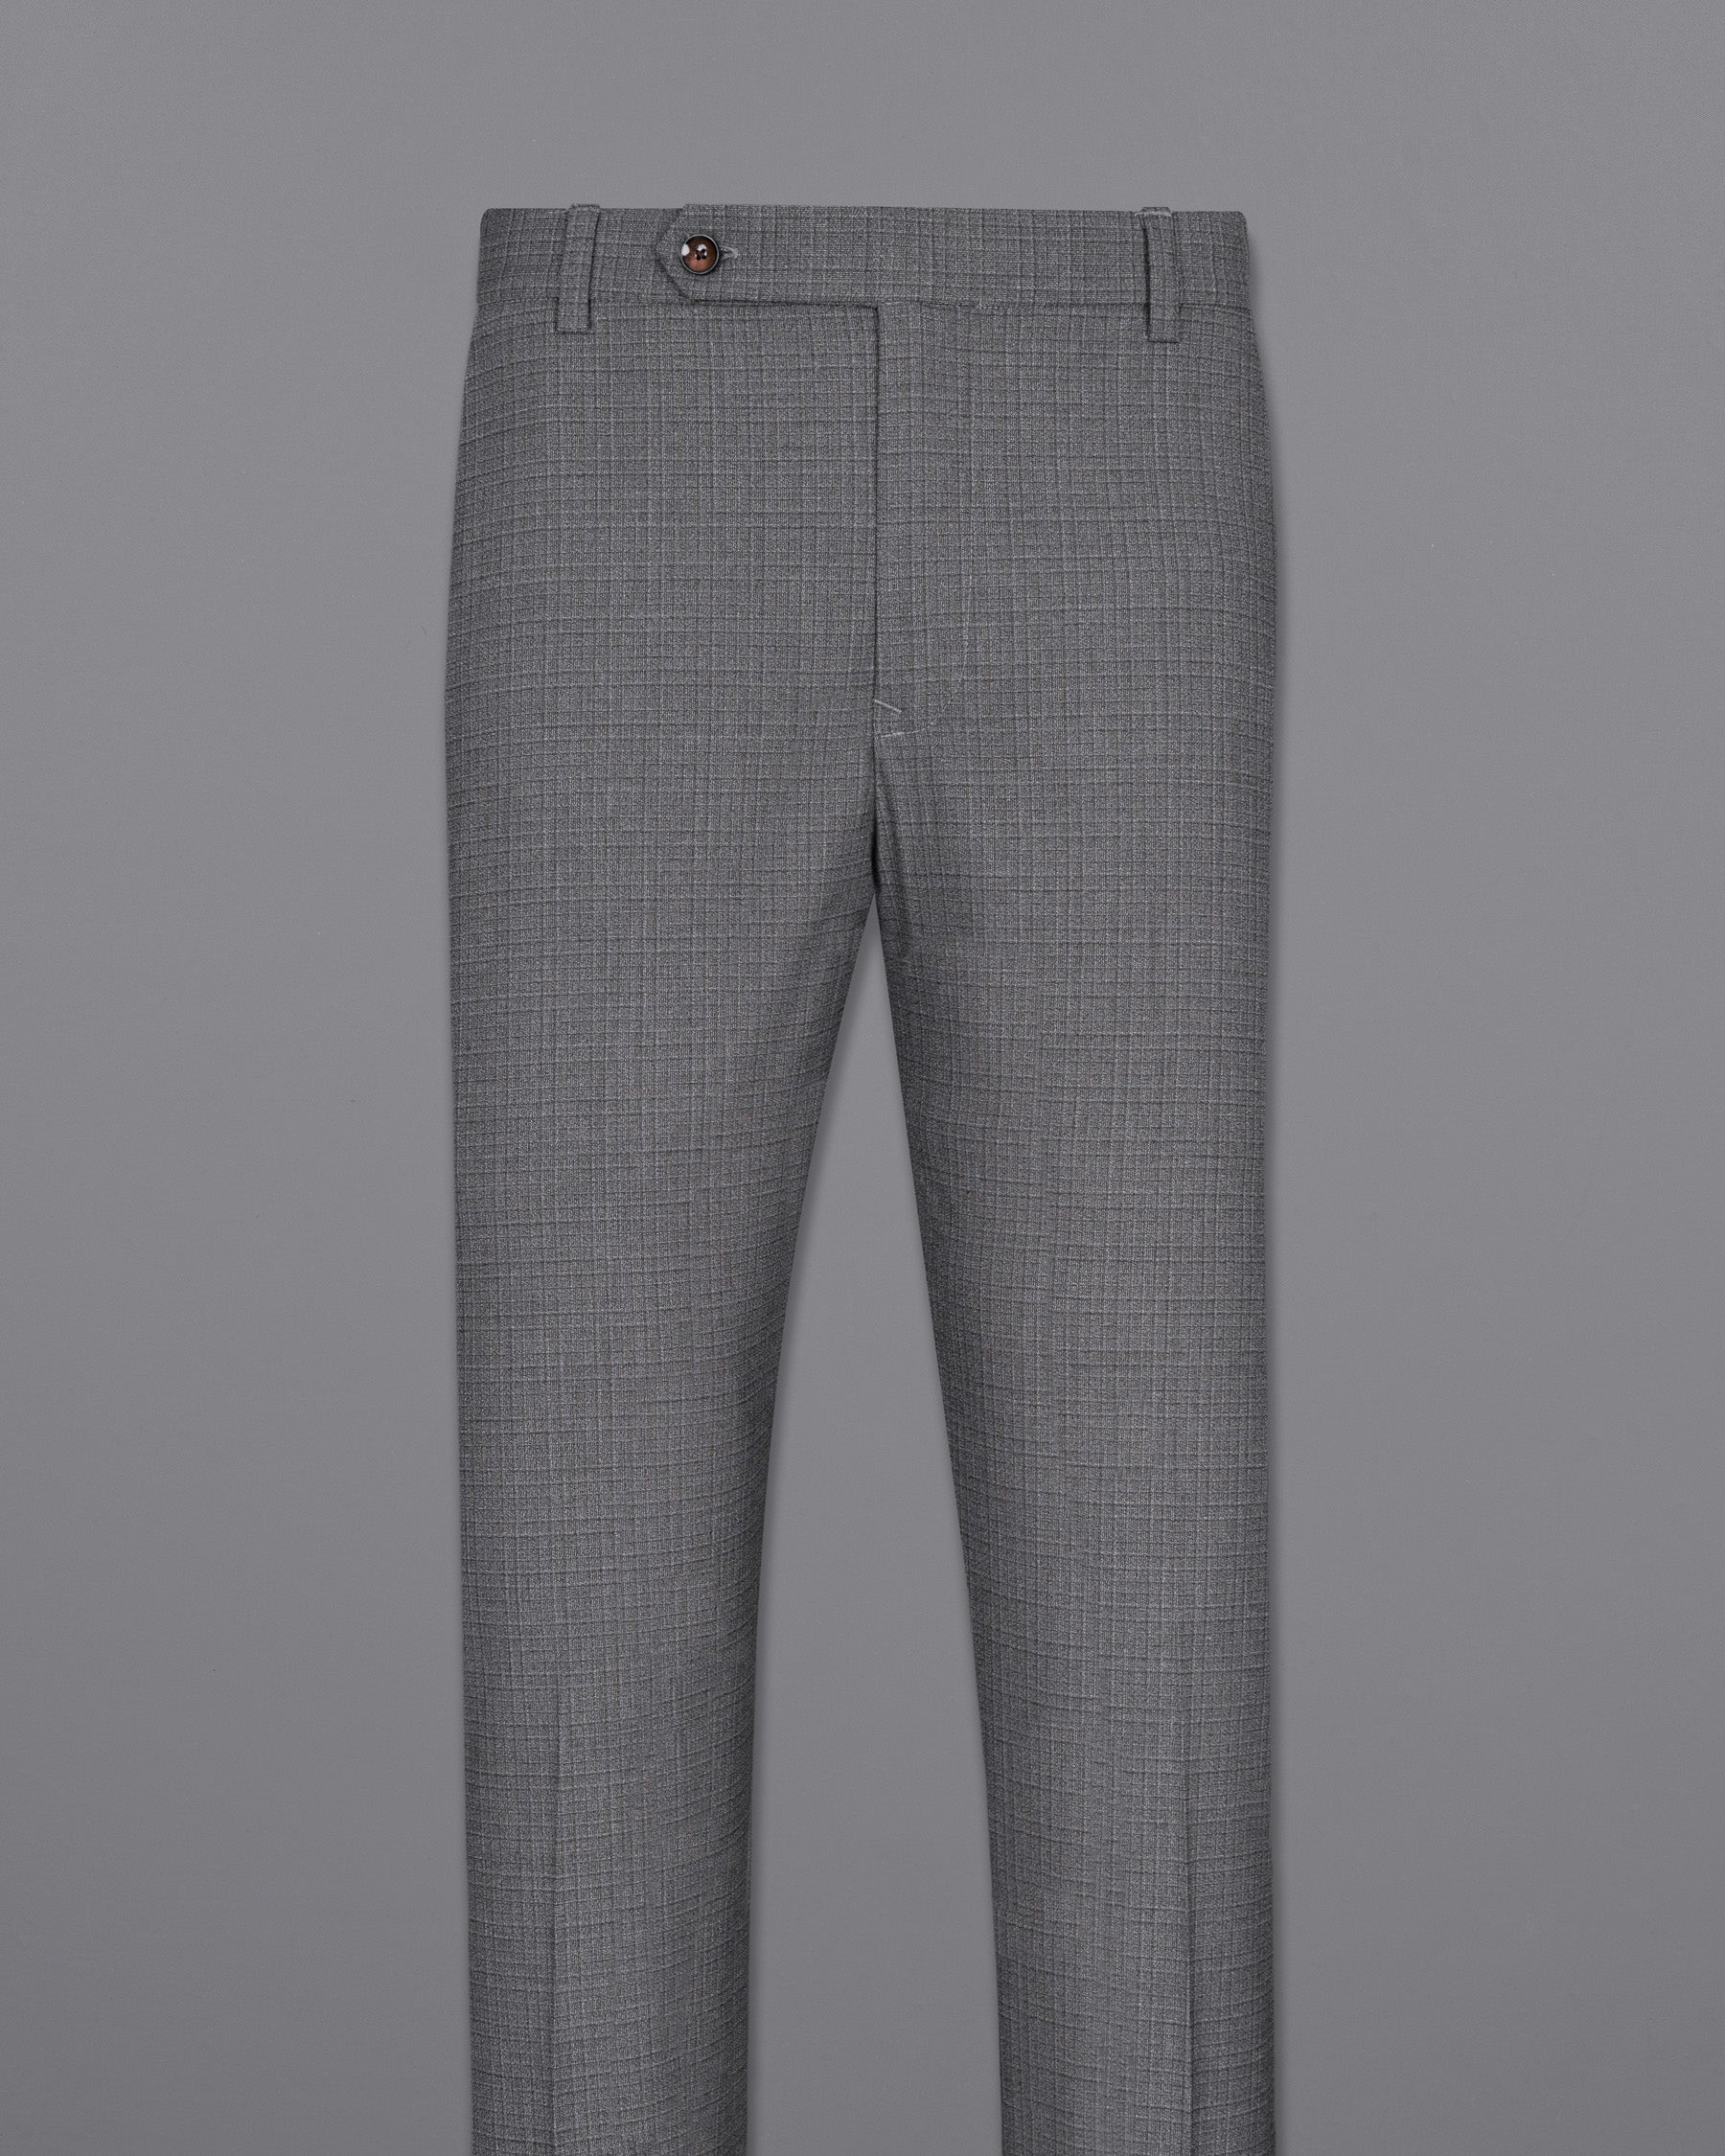 Fuscous Gray Chequered Wool Rich Pant T1448-28, T1448-30, T1448-32, T1448-34, T1448-36, T1448-38, T1448-40, T1448-42, T1448-44